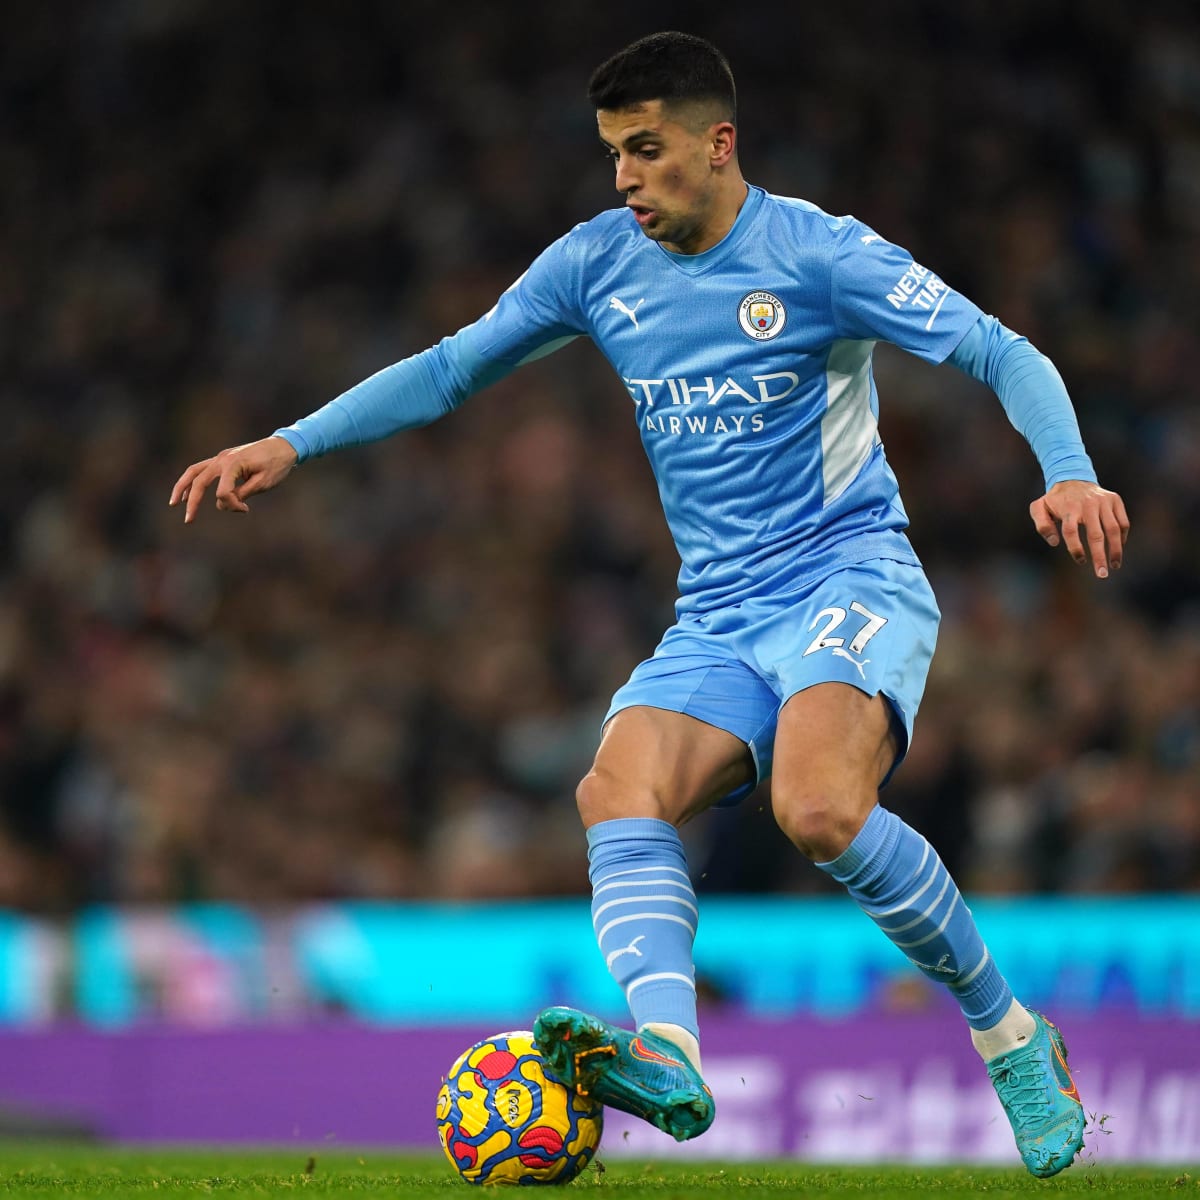 Pep Guardiola Provides Injury Updates on Joao Cancelo, Nathan Aké, and Ruben Dias Ahead of Champions League Clash Illustrated Manchester City News, Analysis and More